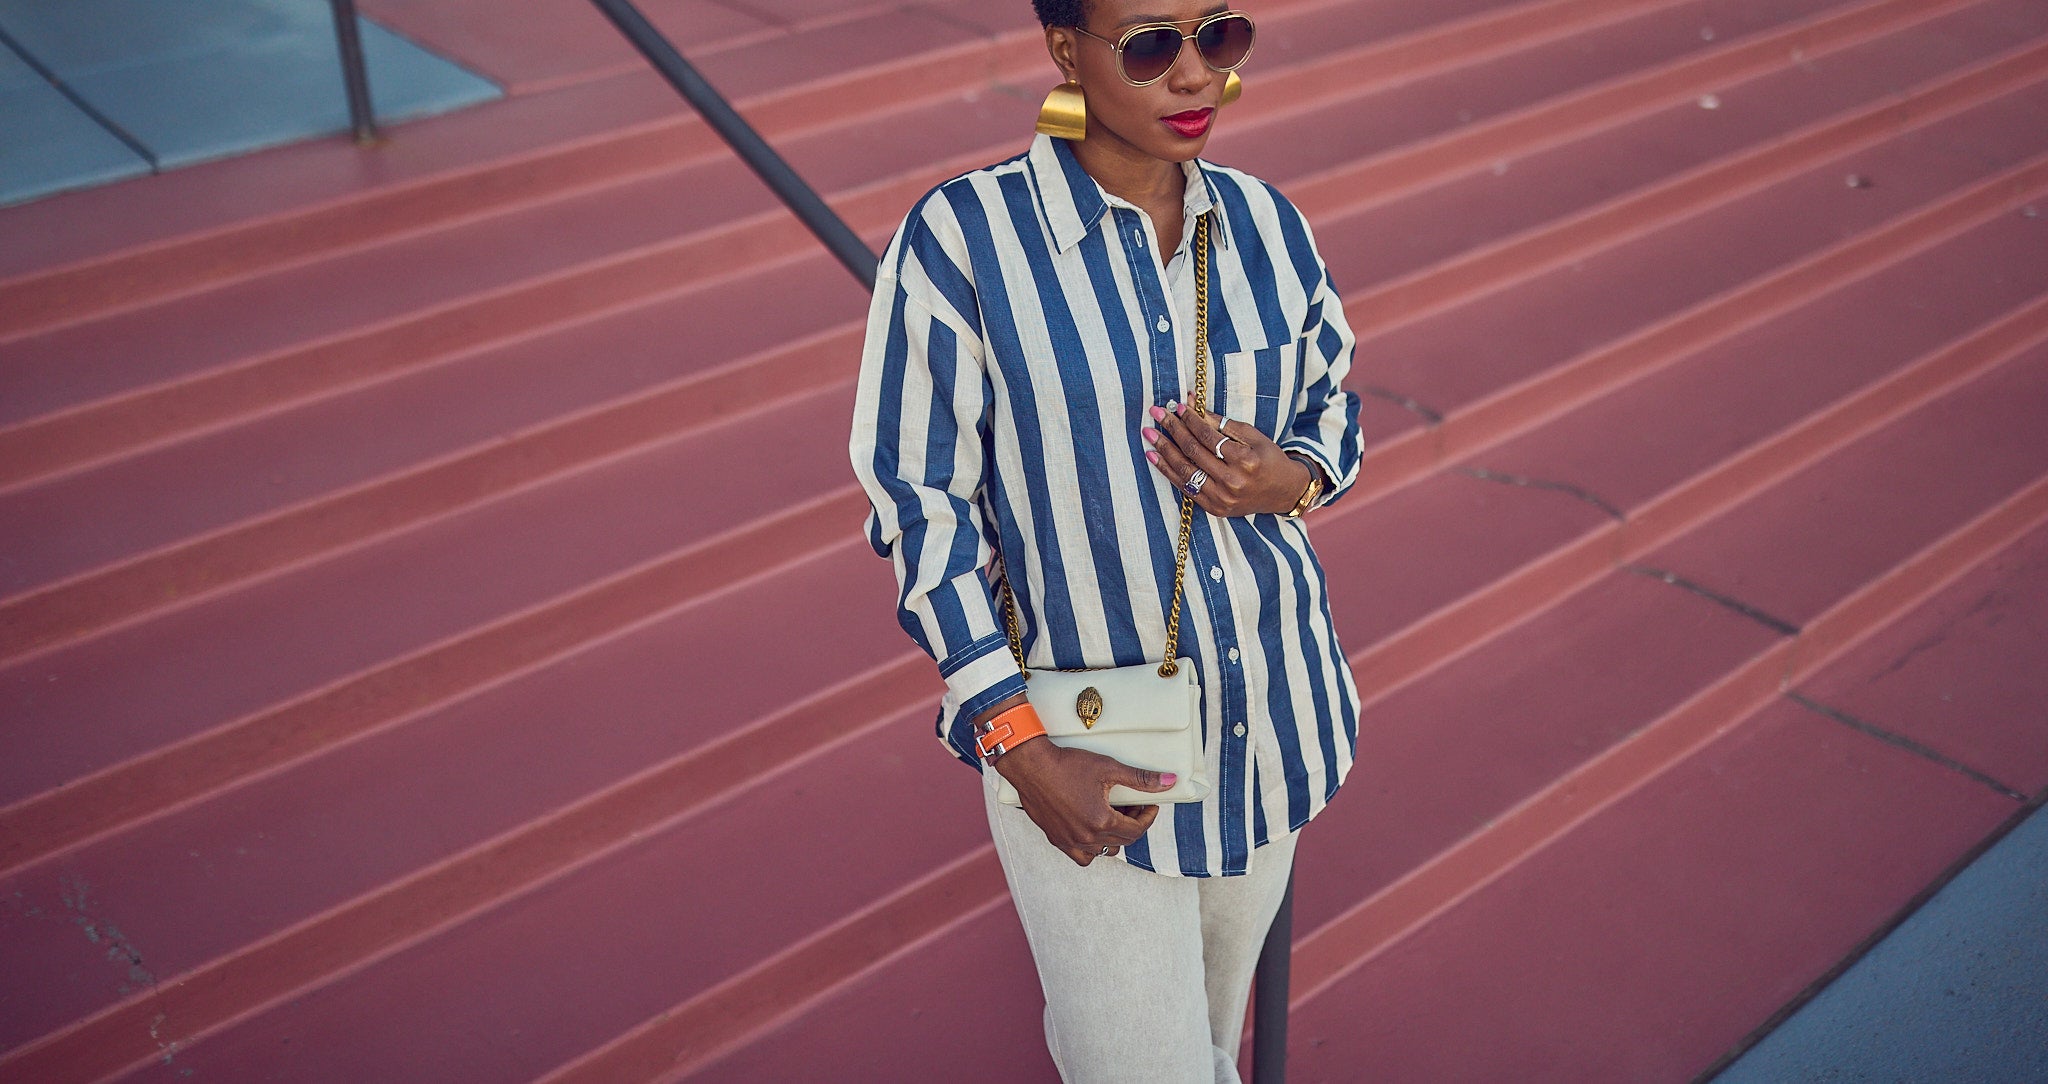 Style influencer Farotelle wearing an oversized blue and beige striped shirt with beige pants. She's wearing sunglasses and a Kurt Geiger chain crossbody handbag. This is an elevated casual Spring look. She is standing against contrastive reddish stairs.